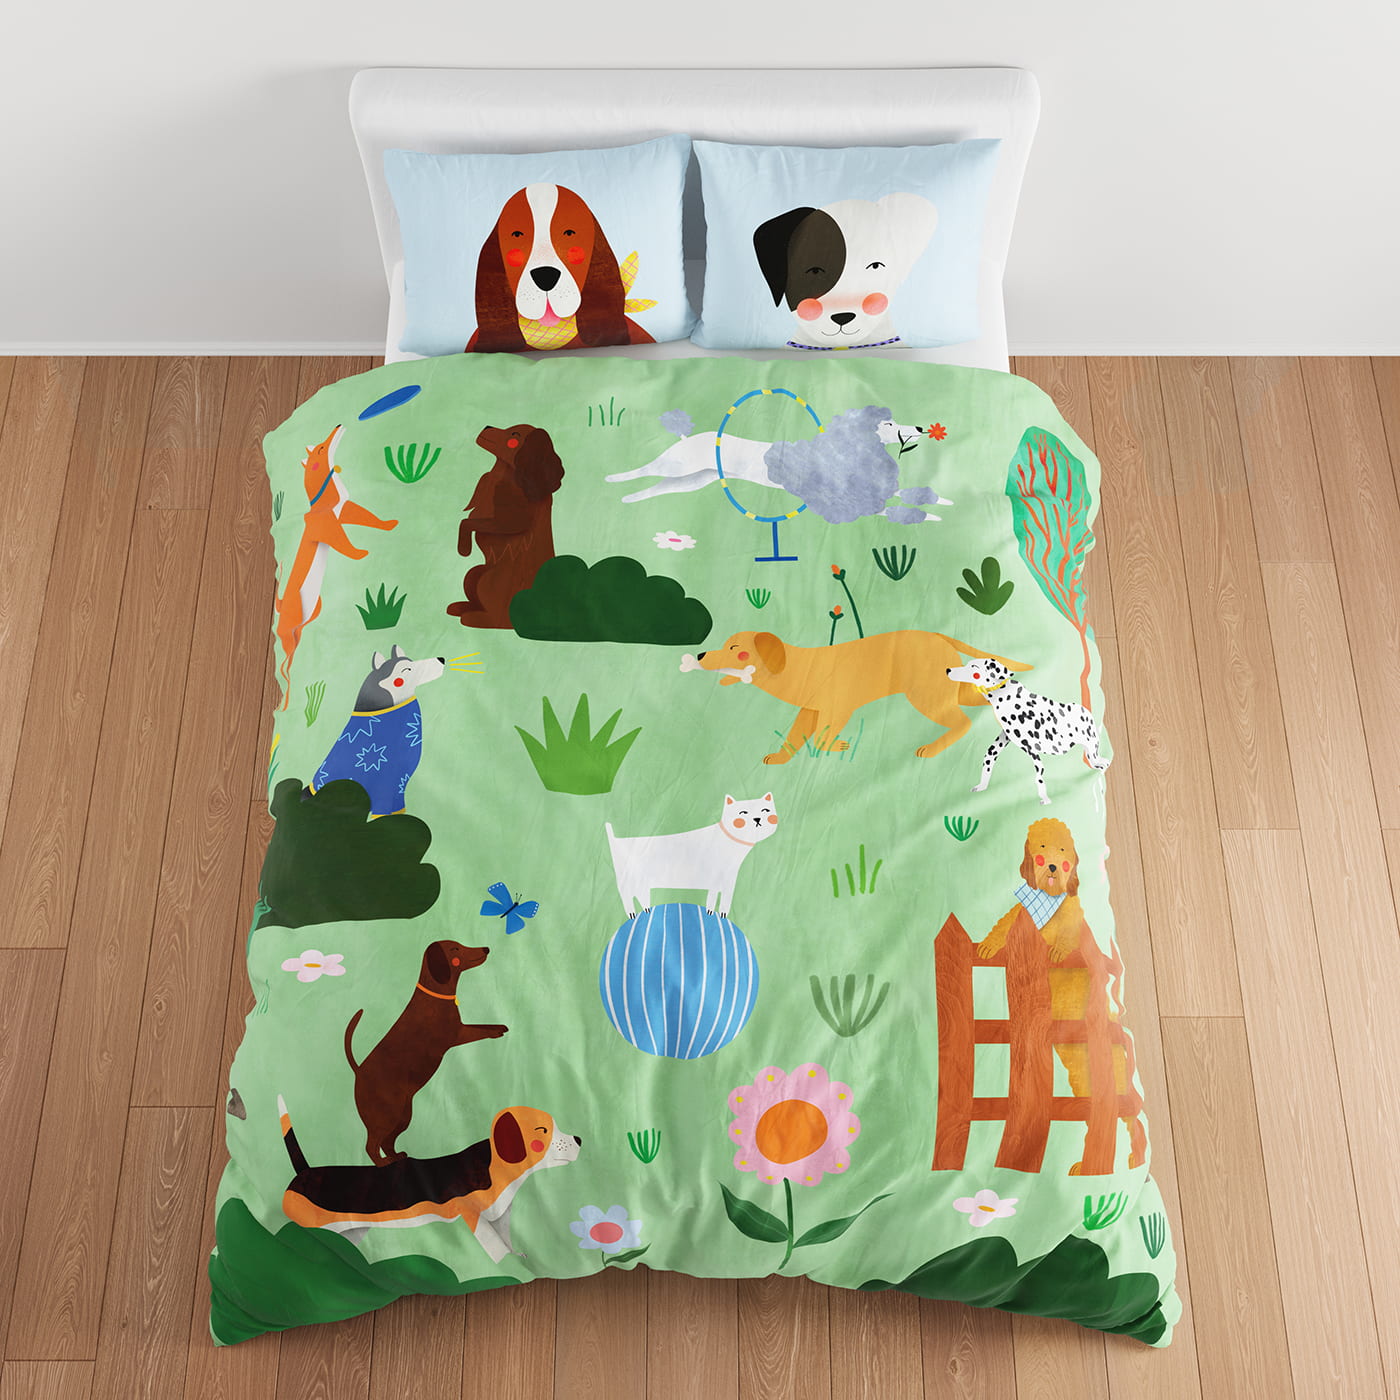 dog themed bedding for children, featuring different breeds including goldendoodle, dalmatian, golden retriever, beagle, husky, poodle and more